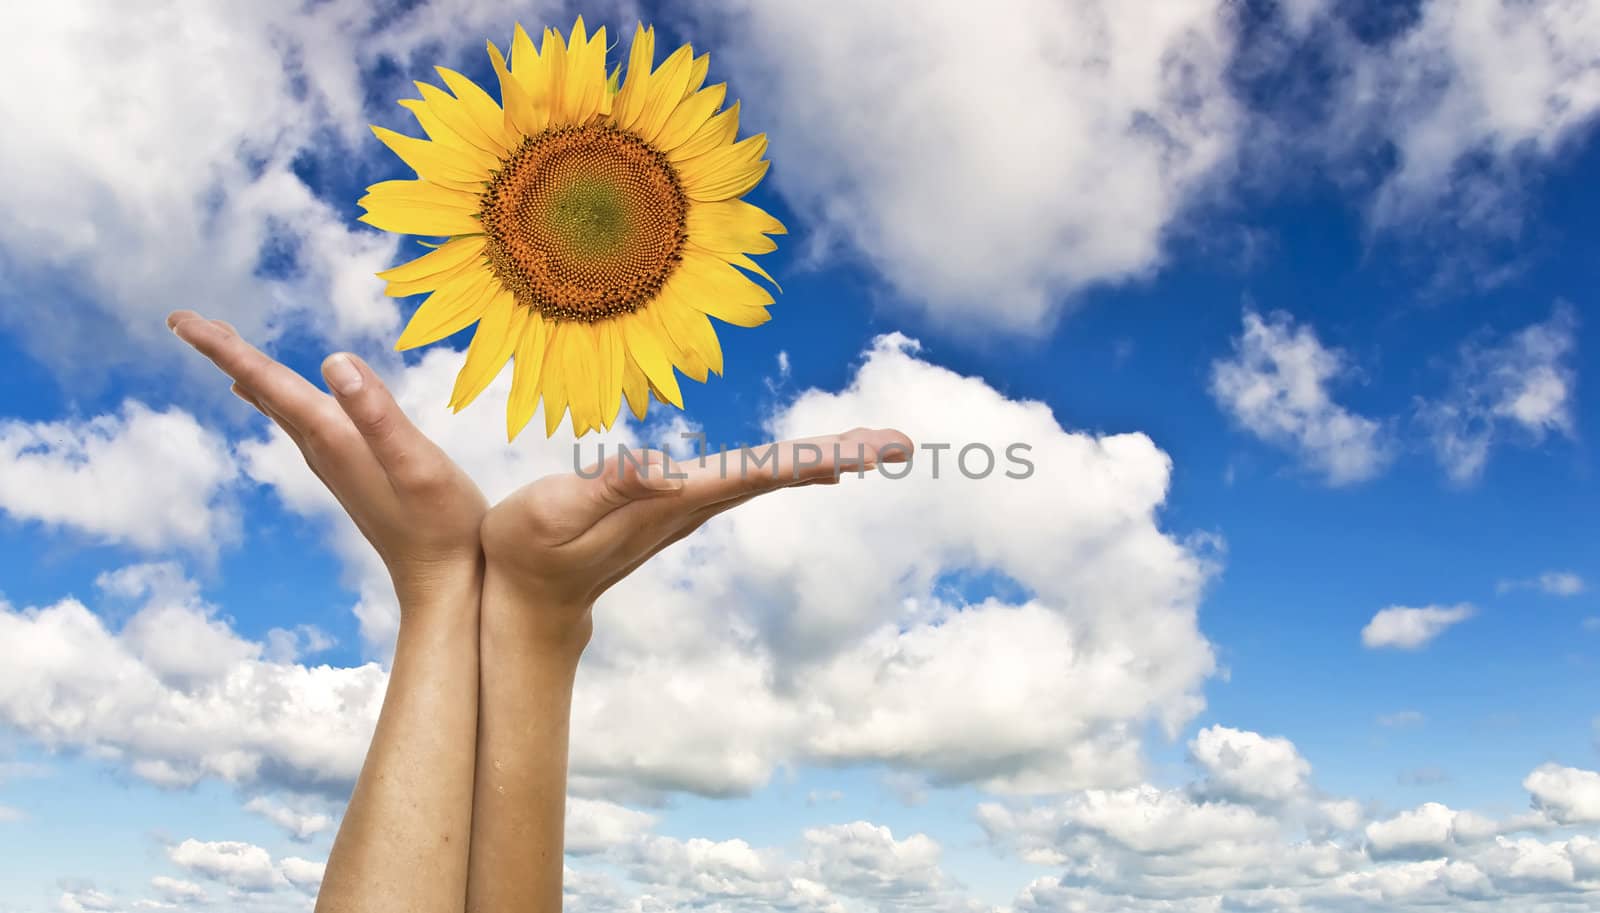 Women's hands with a sunflower on background of blue clear sky. Symbol of nature and concern.